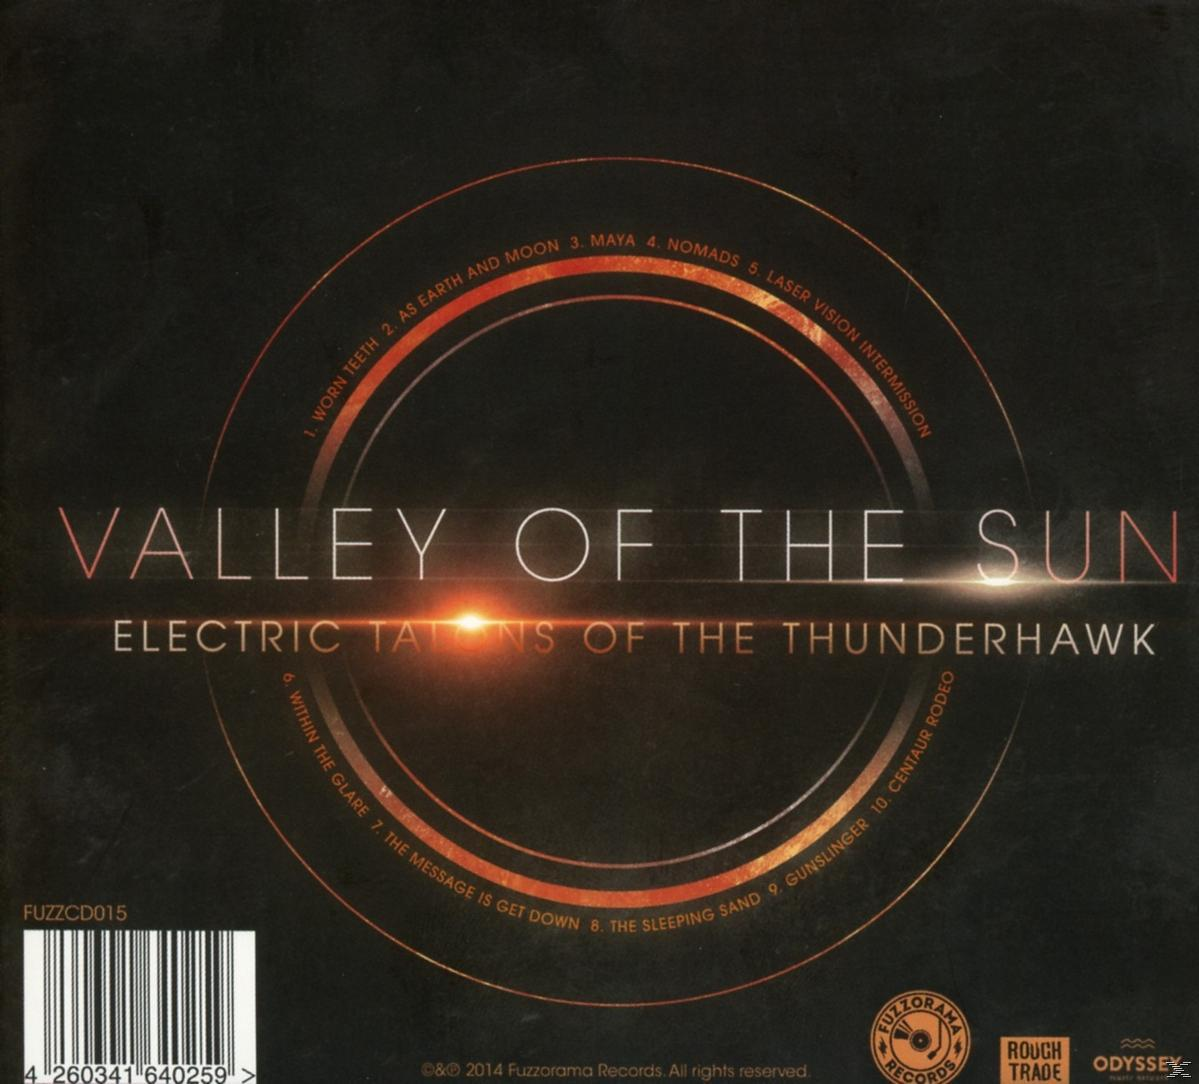 Electric Of Thunderhawk Talons - - Sun (CD) Of The The Valley